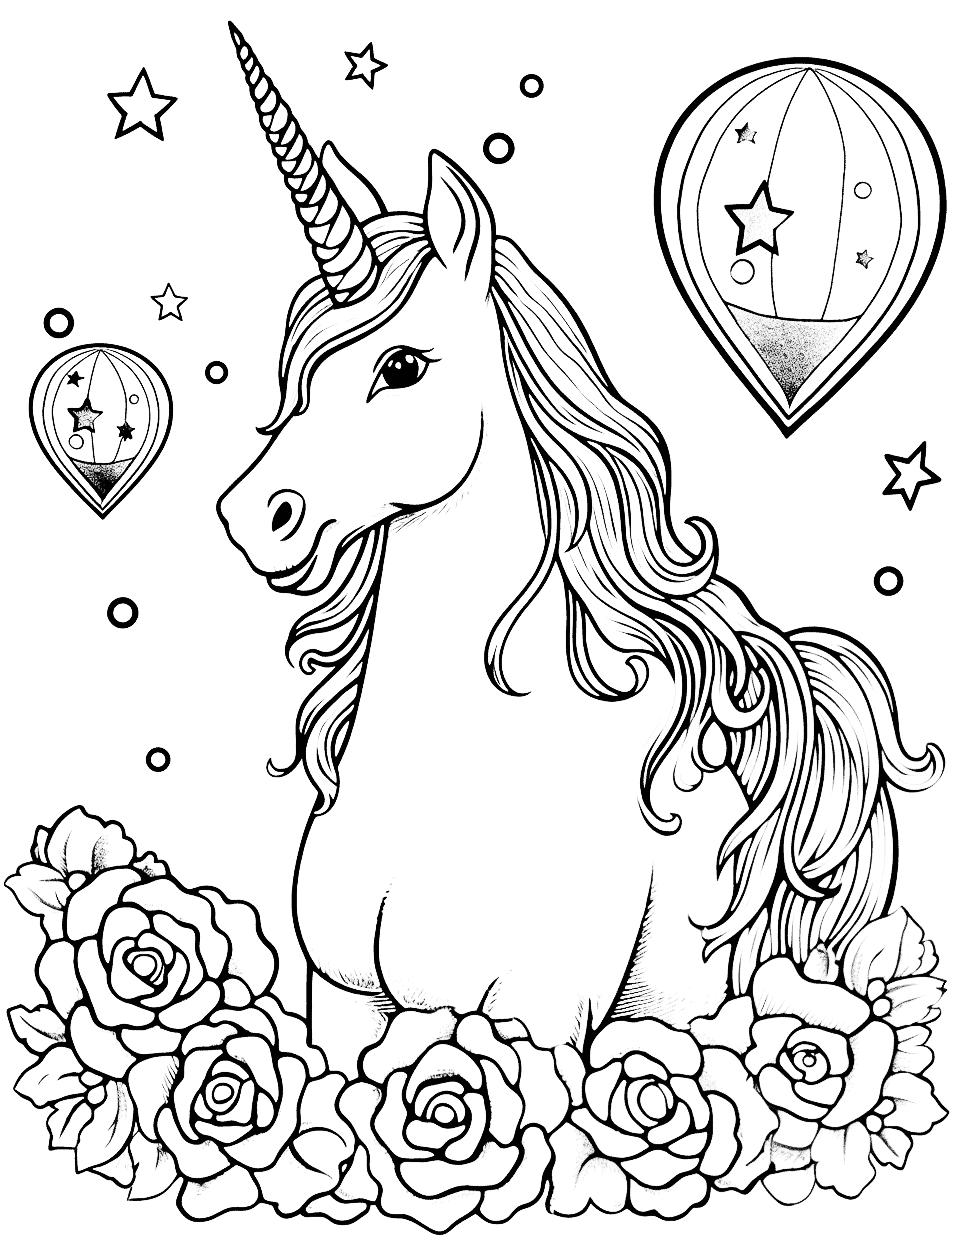 Unicorn Easter Coloring Page - A majestic unicorn surrounded by rainbows and flowers creating a magical atmosphere.